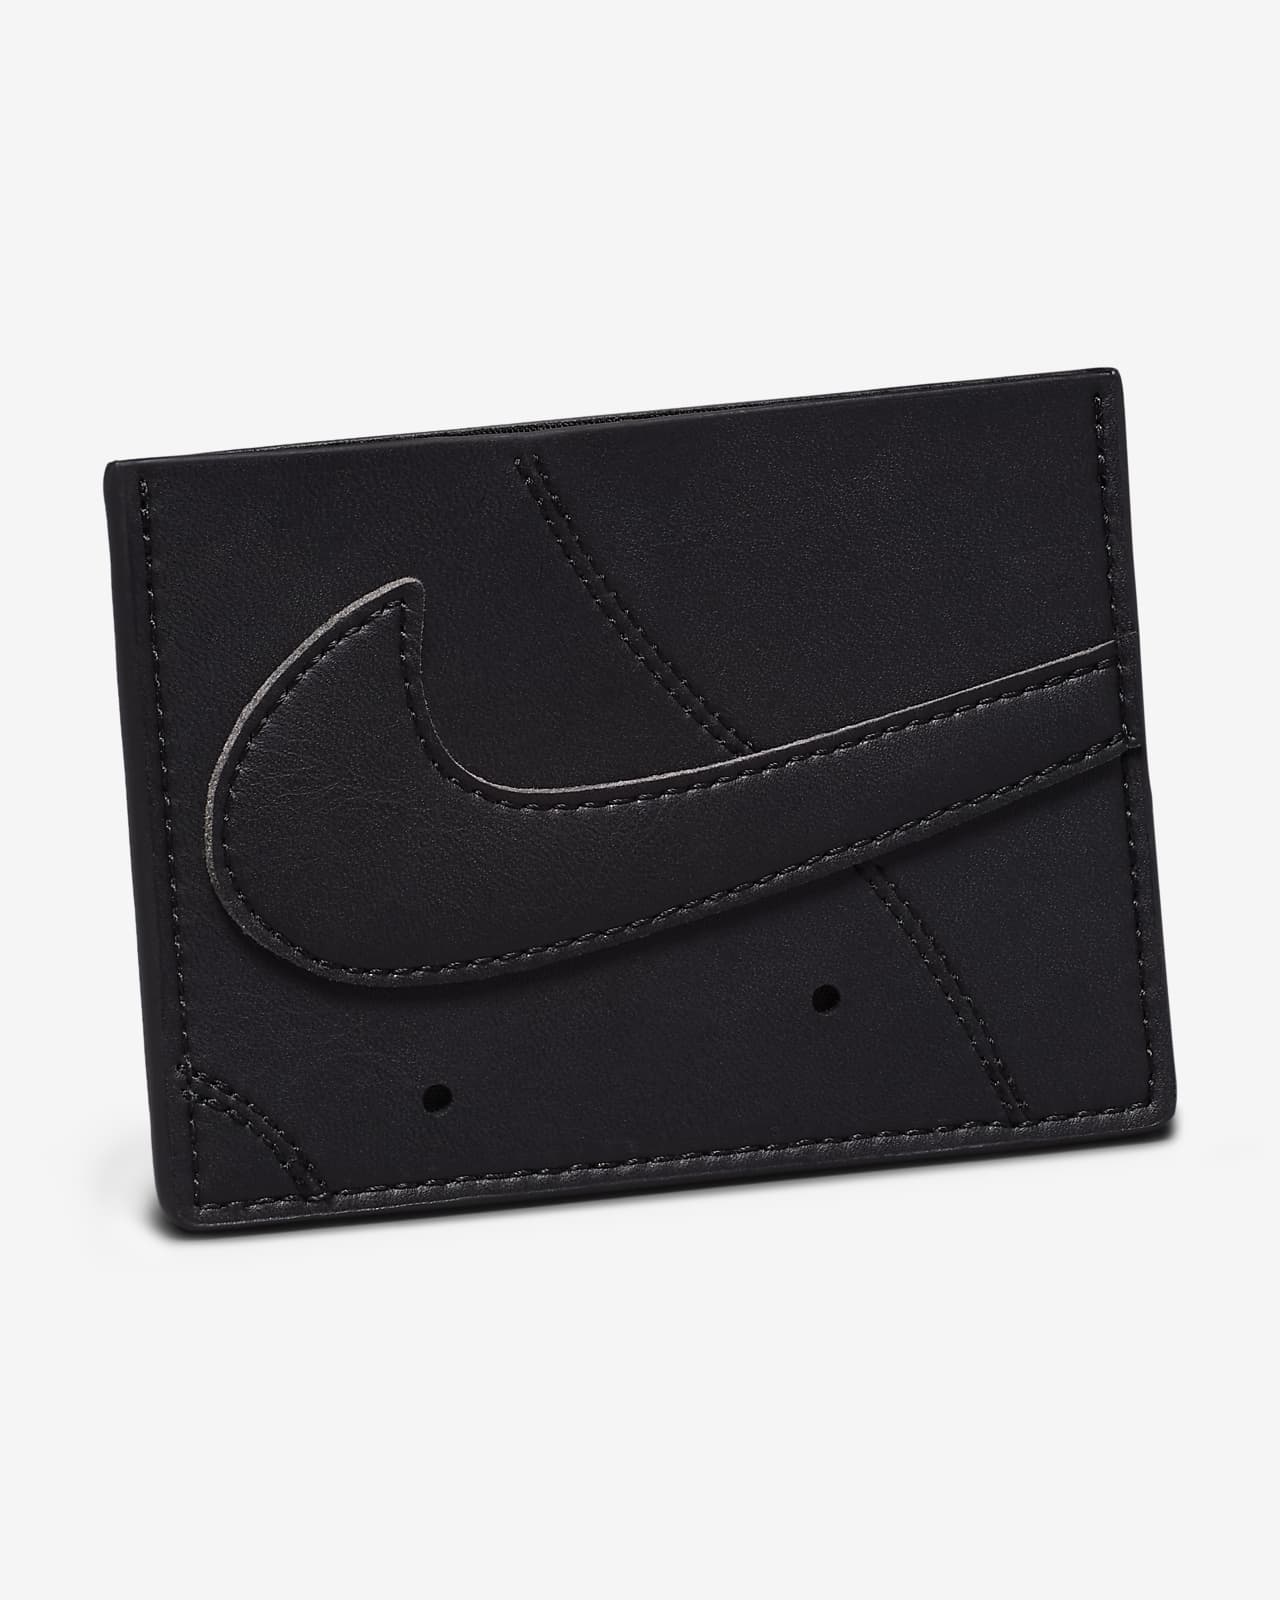 Nike Icon Air Force 1 Card Wallet